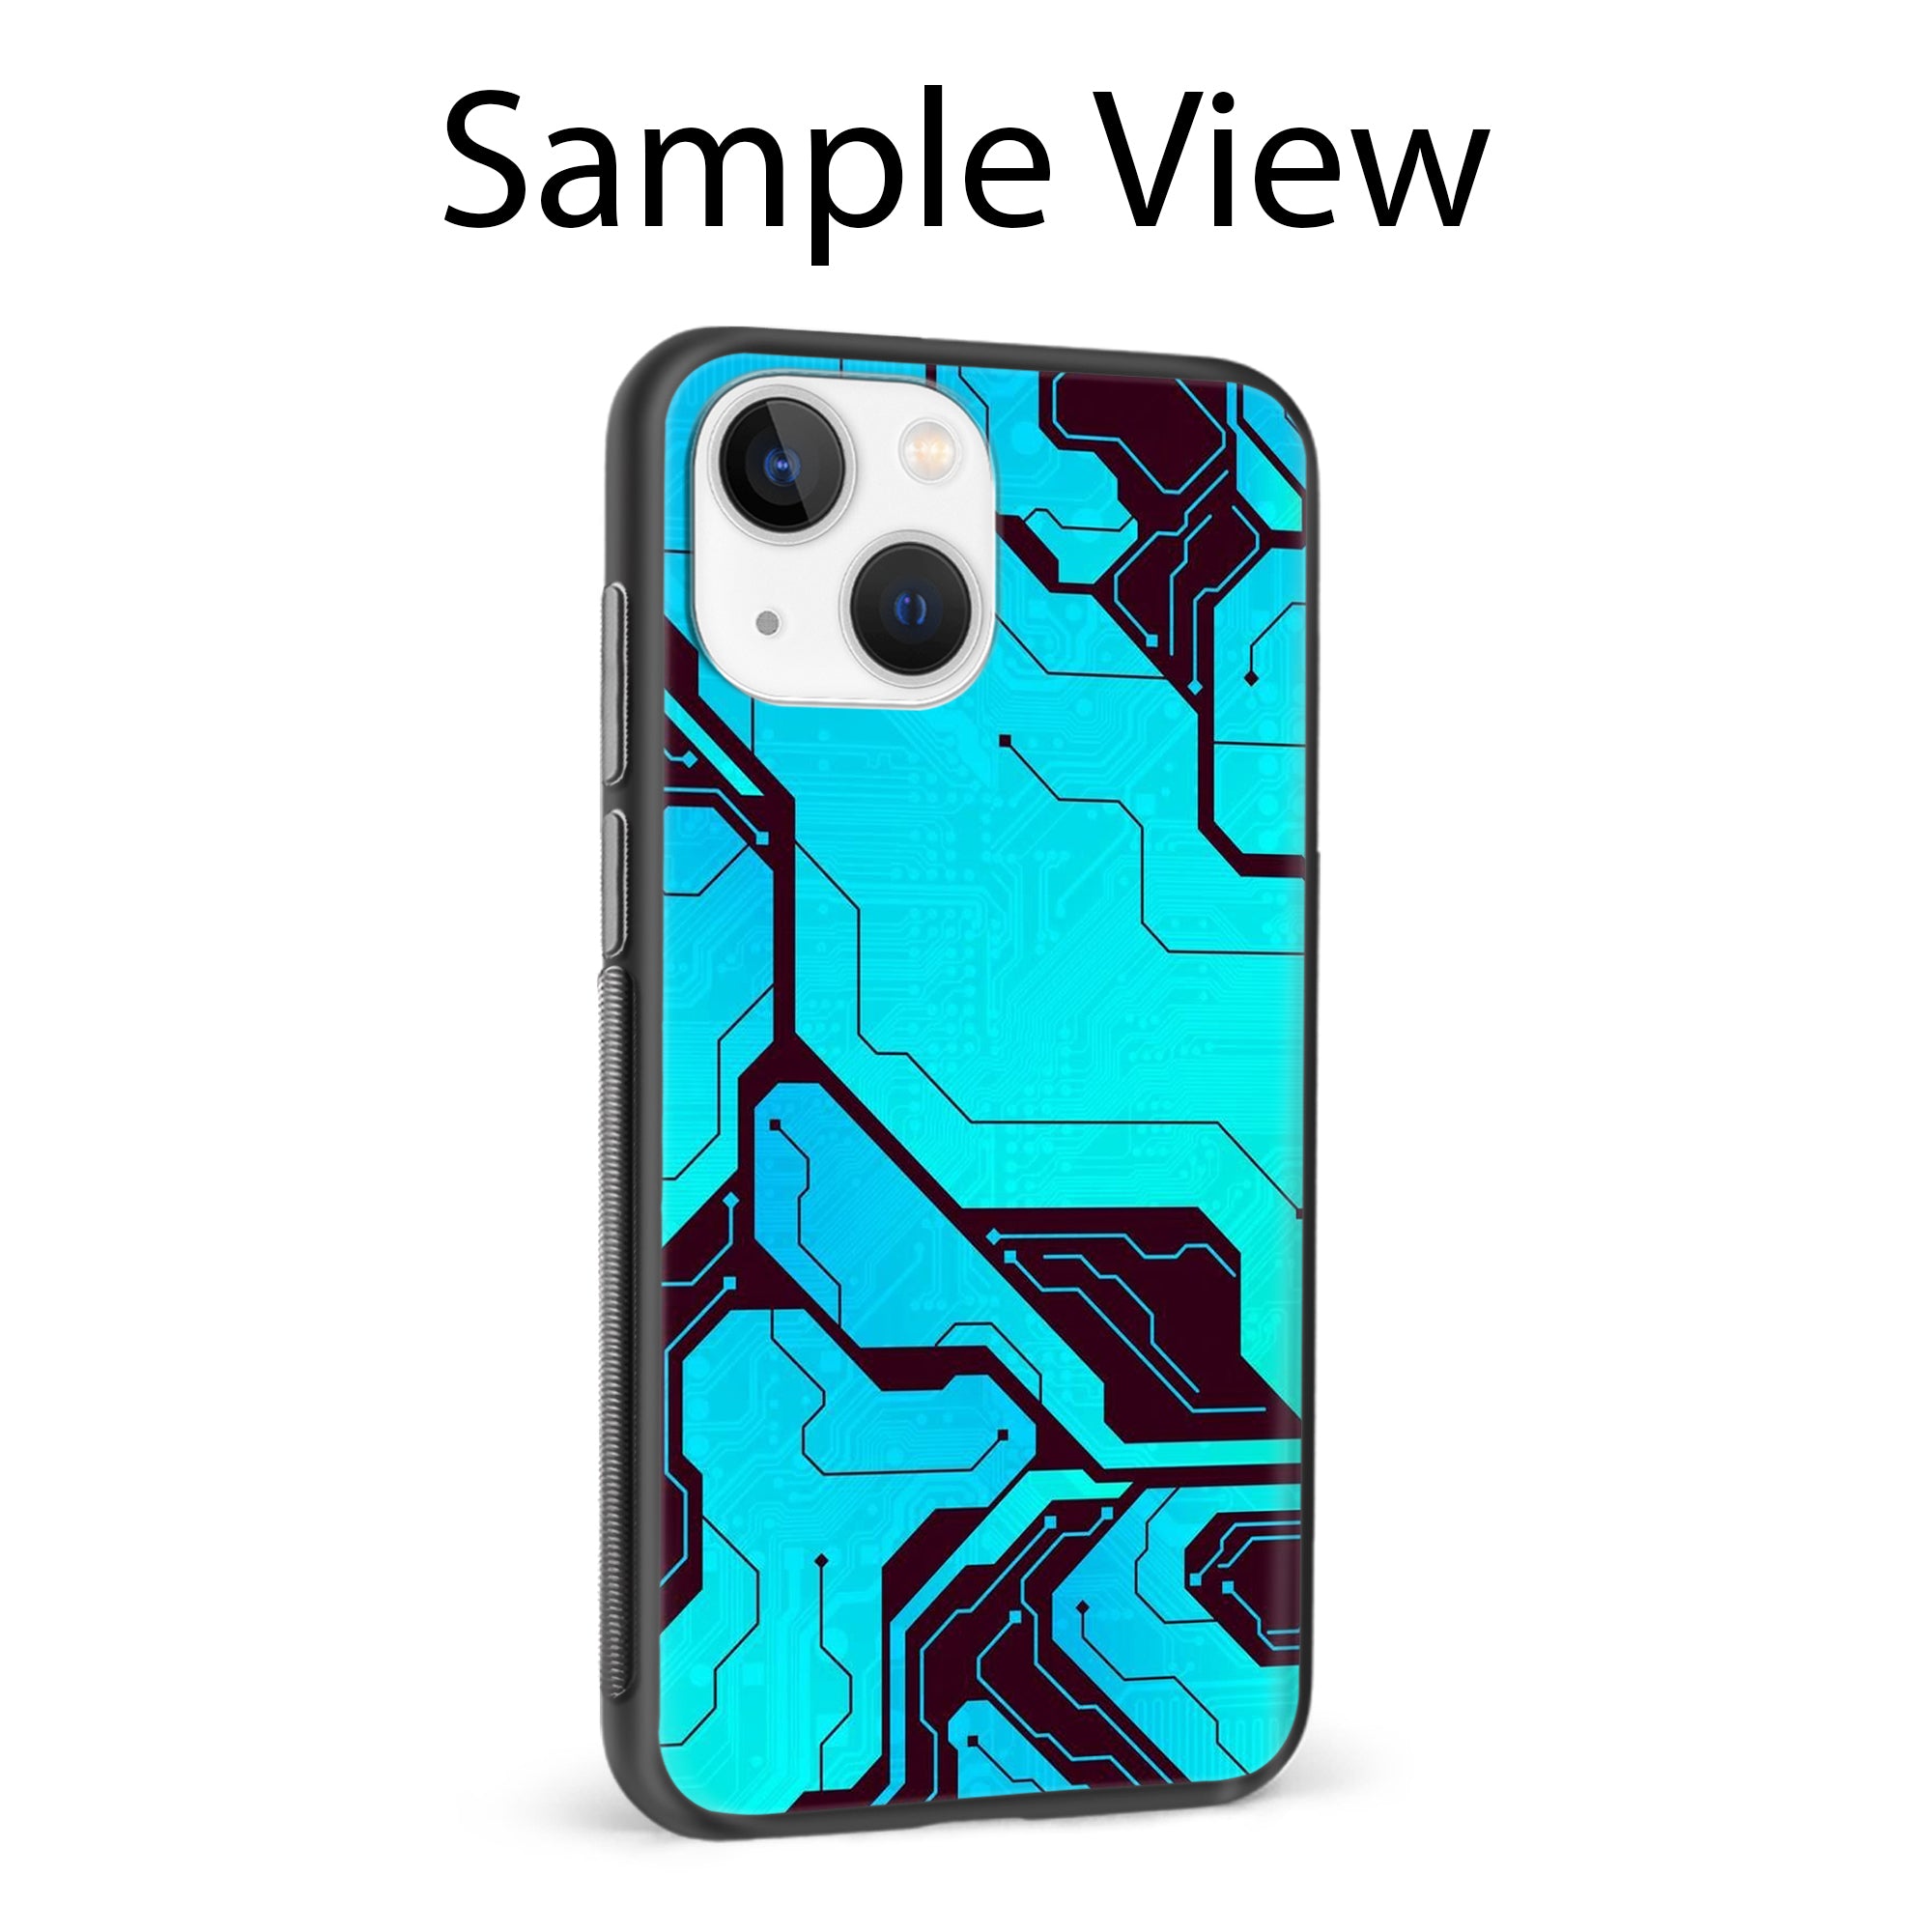 Buy Futuristic Line Glass/Metal Back Mobile Phone Case/Cover For iPhone 11 Pro Online